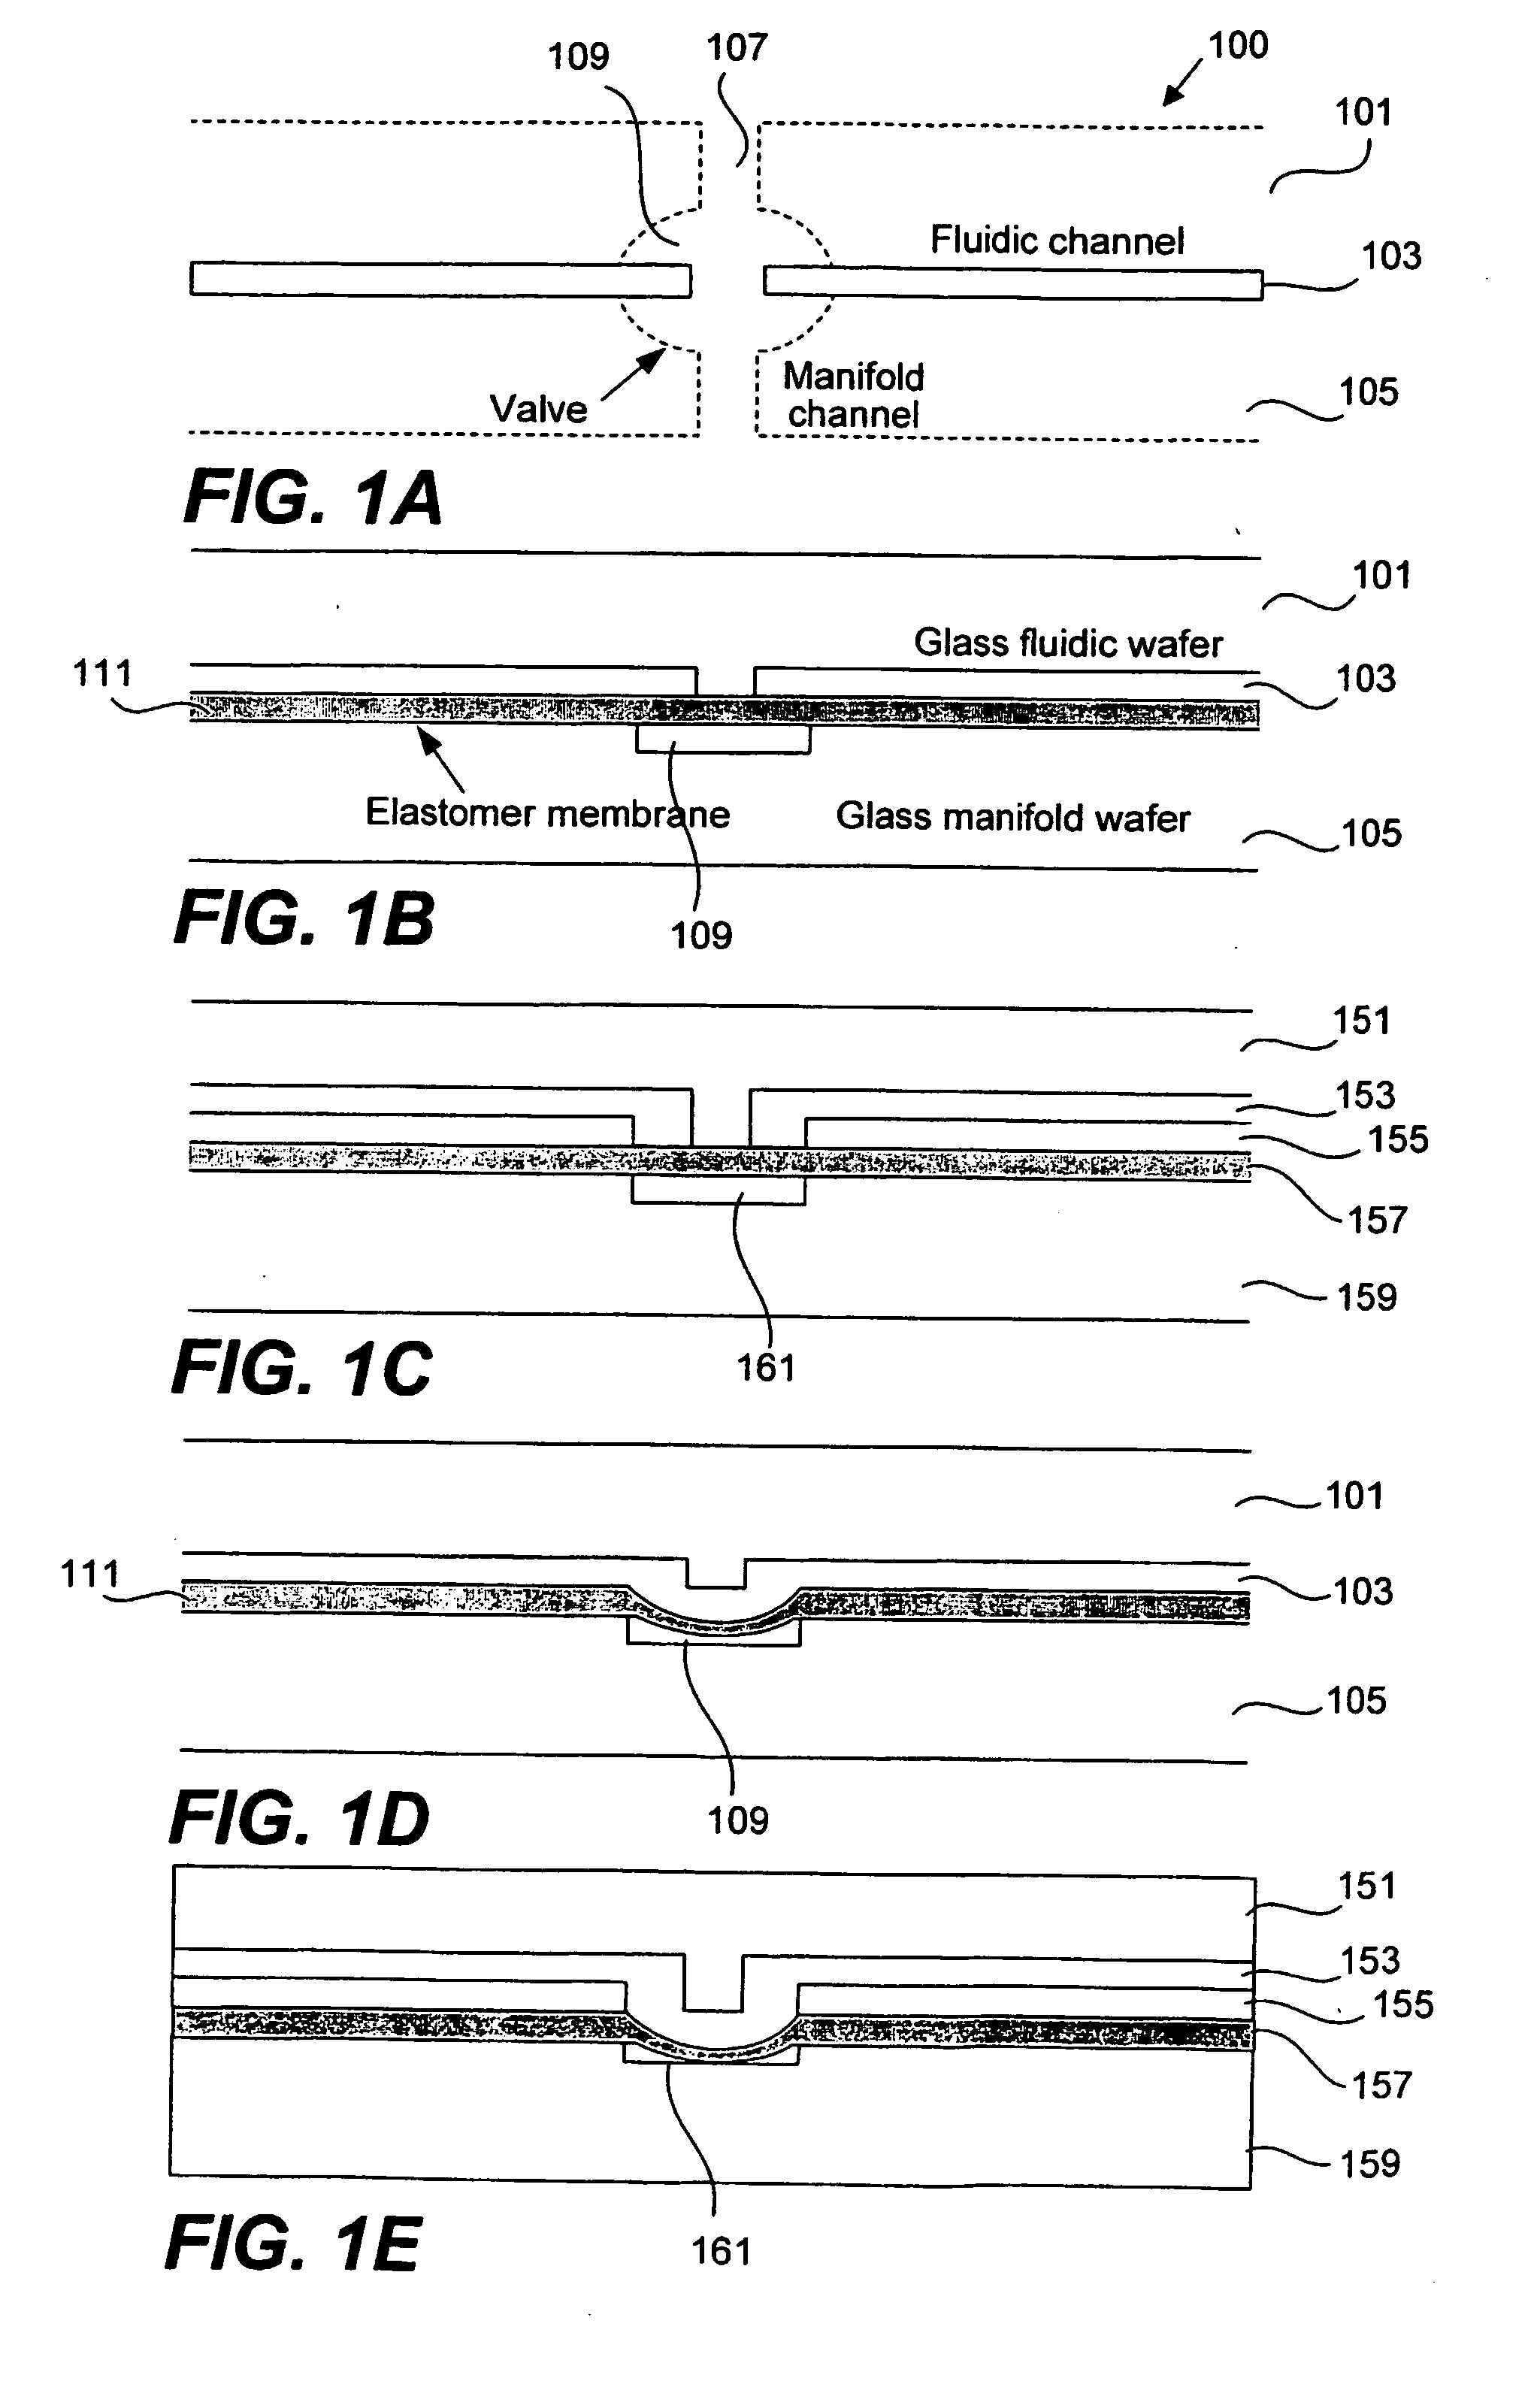 Methods and apparatus for pathogen detection and analysis